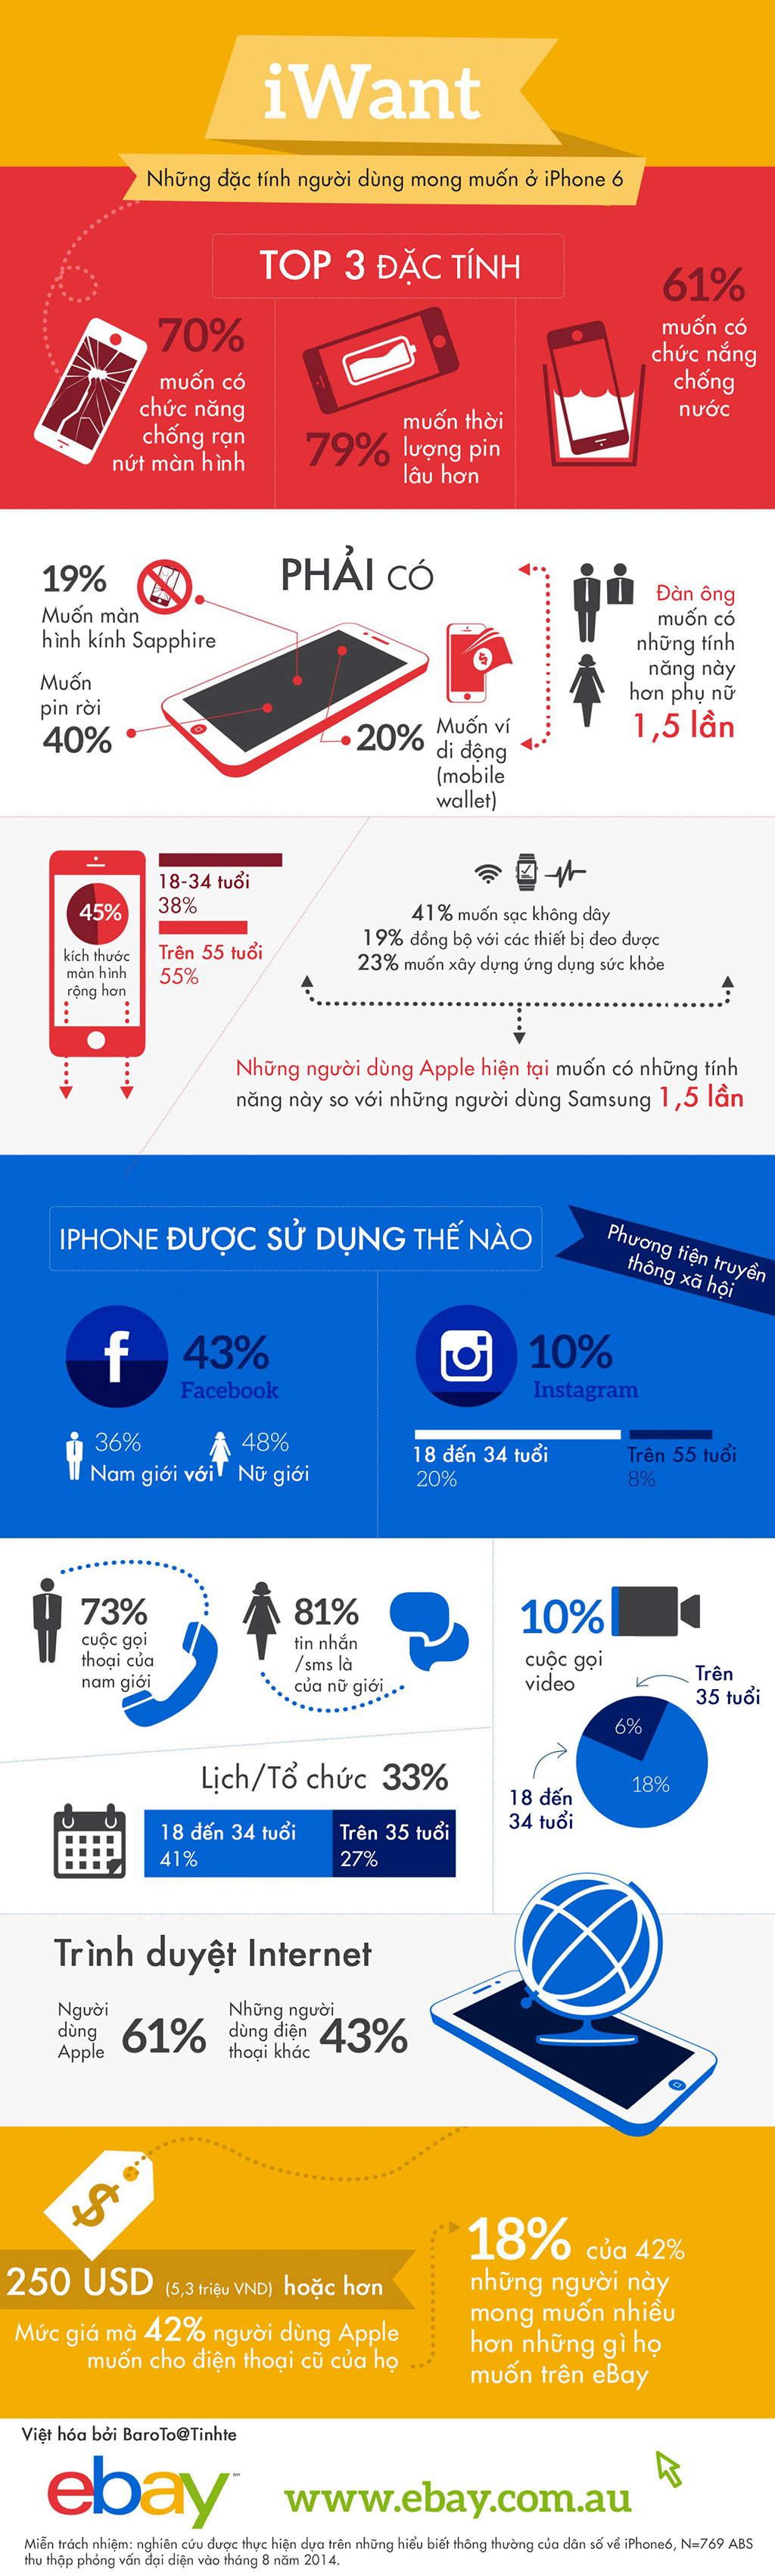 [Infographic] iWant - Những mong muốn của người dùng iPhone 6